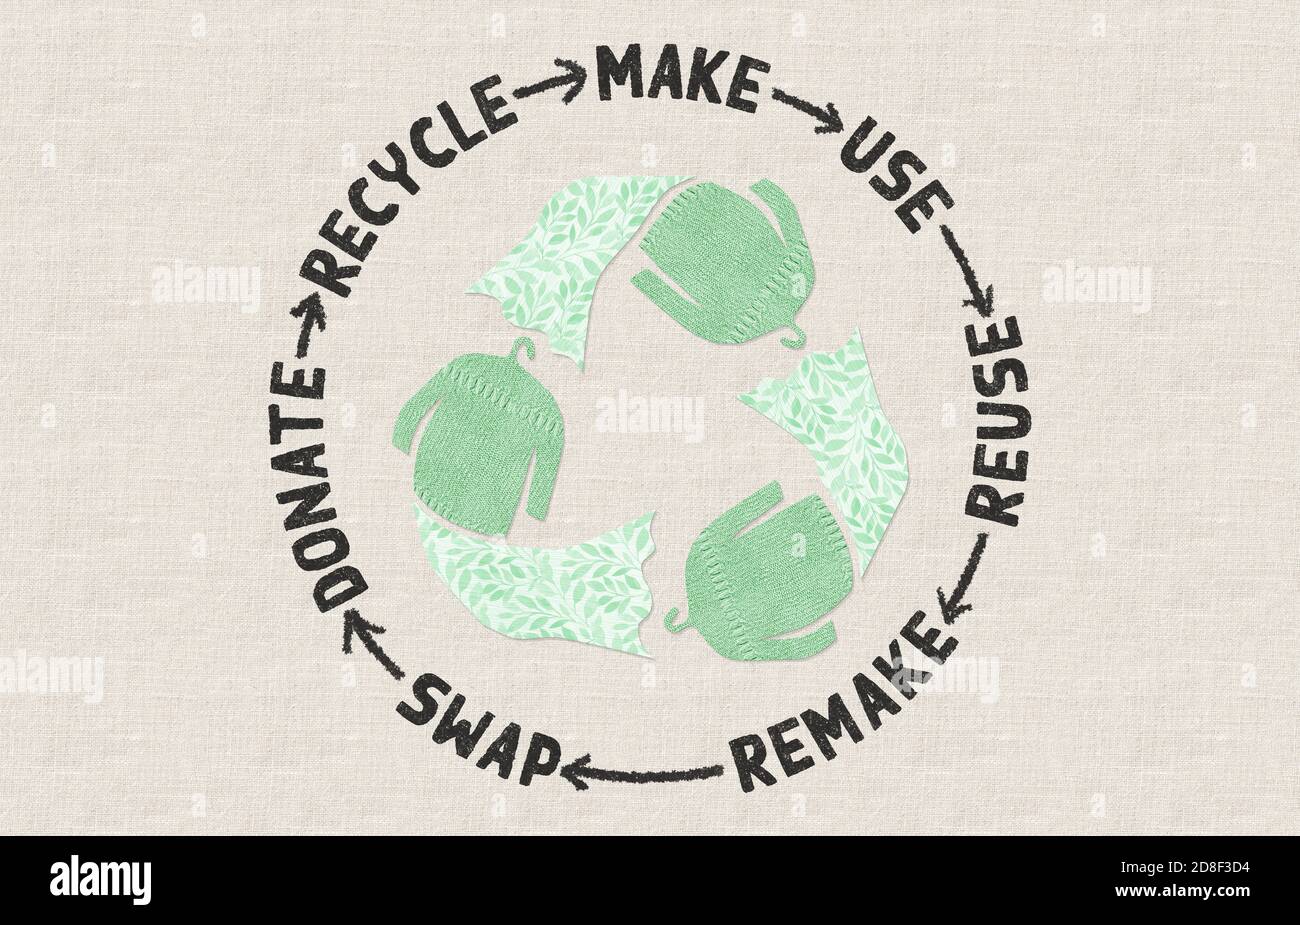 Recycle textiles, Circular Economy, make, use, reuse, swap, donate, recycle with eco clothes recycle icon sustainable fashion concept Stock Photo